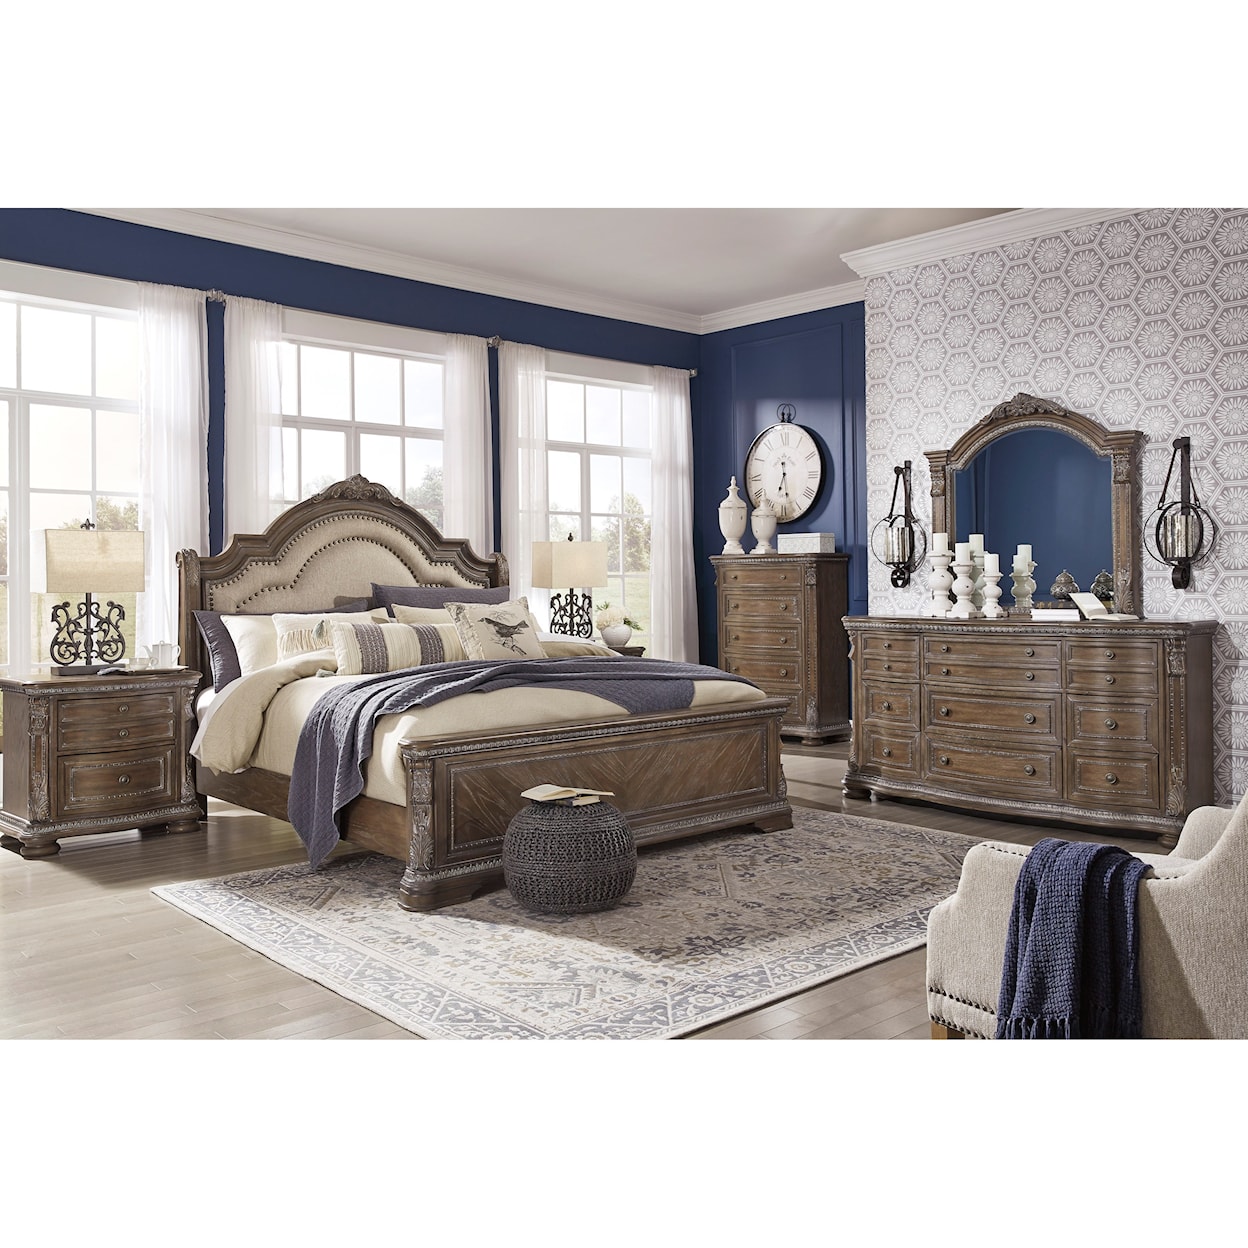 Signature Design by Ashley Furniture Charmond Queen Bedroom Group